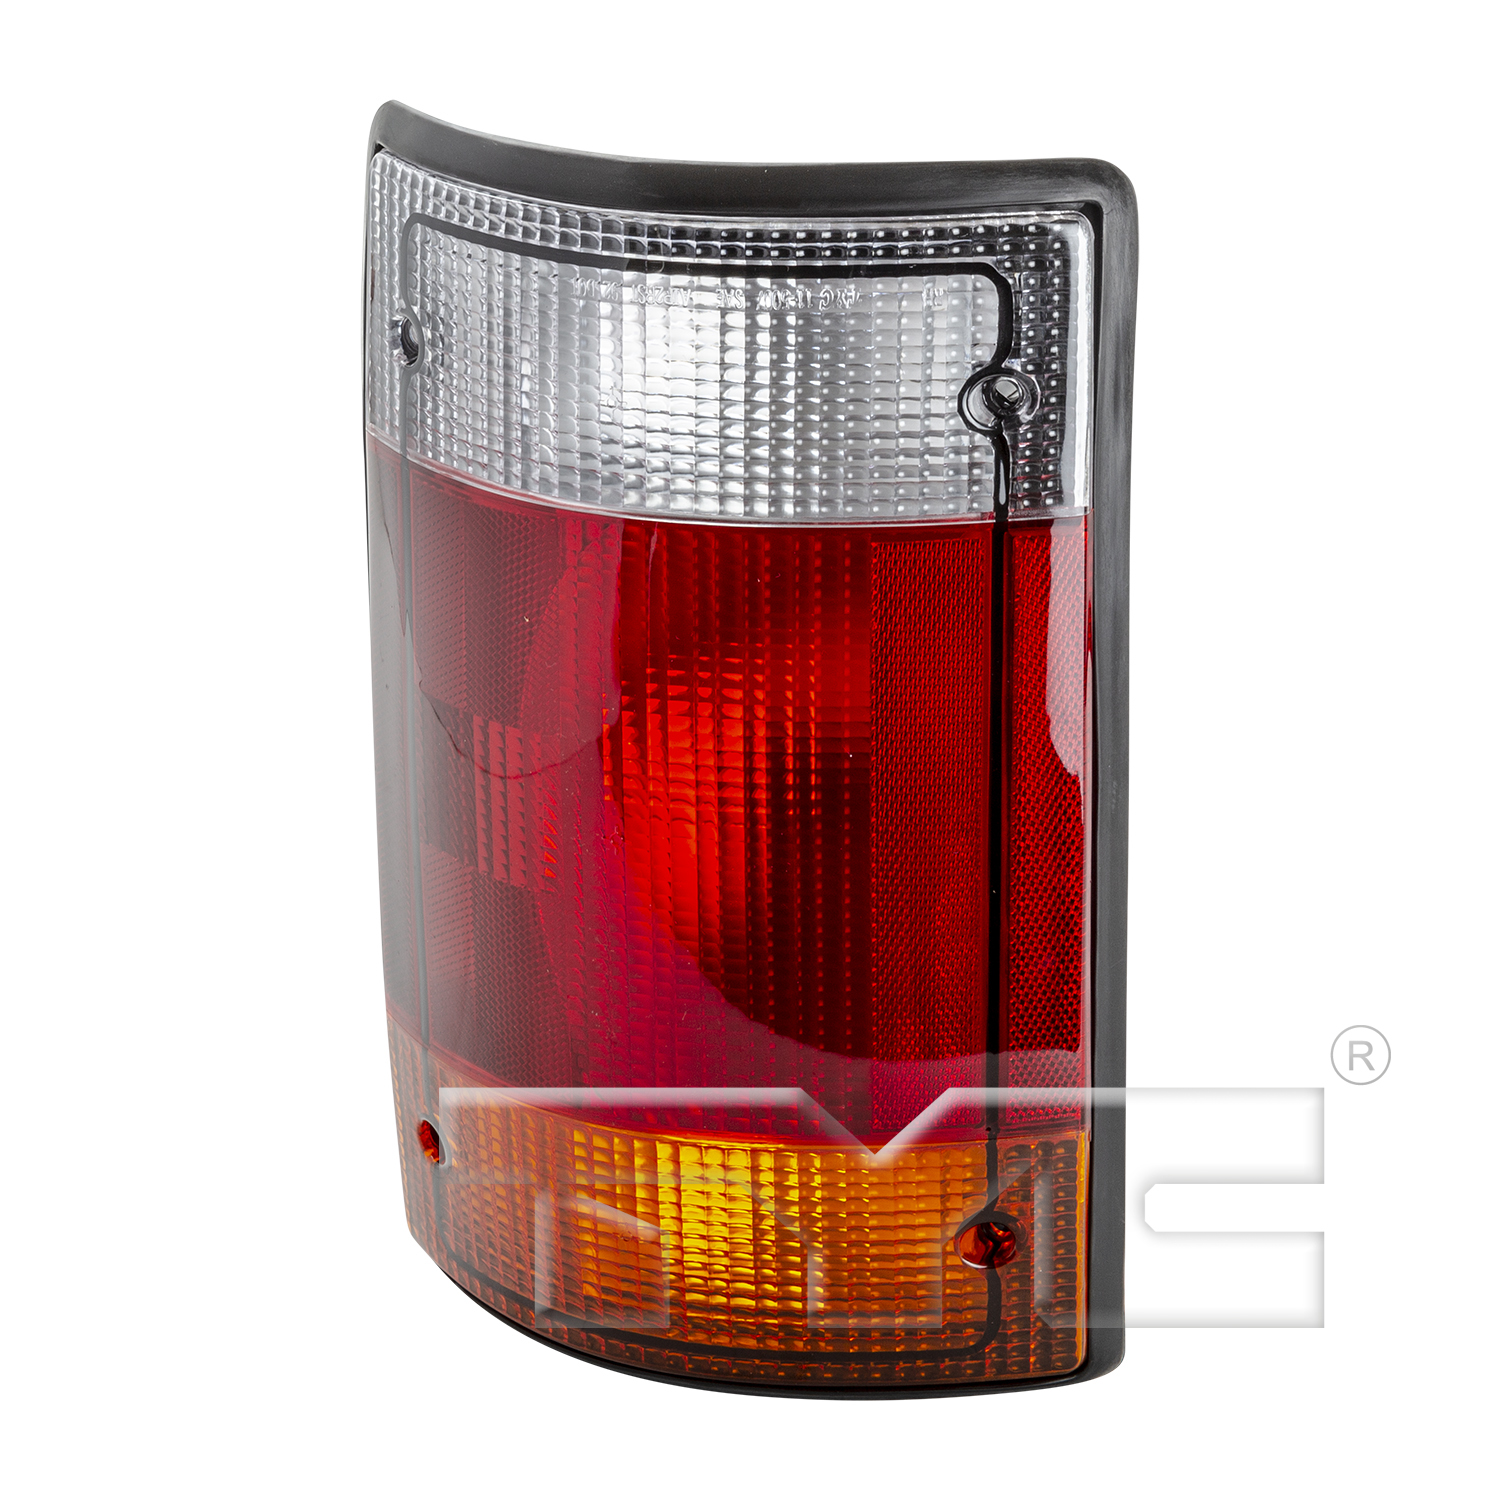 Aftermarket TAILLIGHTS for FORD - E-150 ECONOLINE CLUB WAGON, E-150 ECONOLINE CLUB WAGON,92-94,RT Taillamp assy